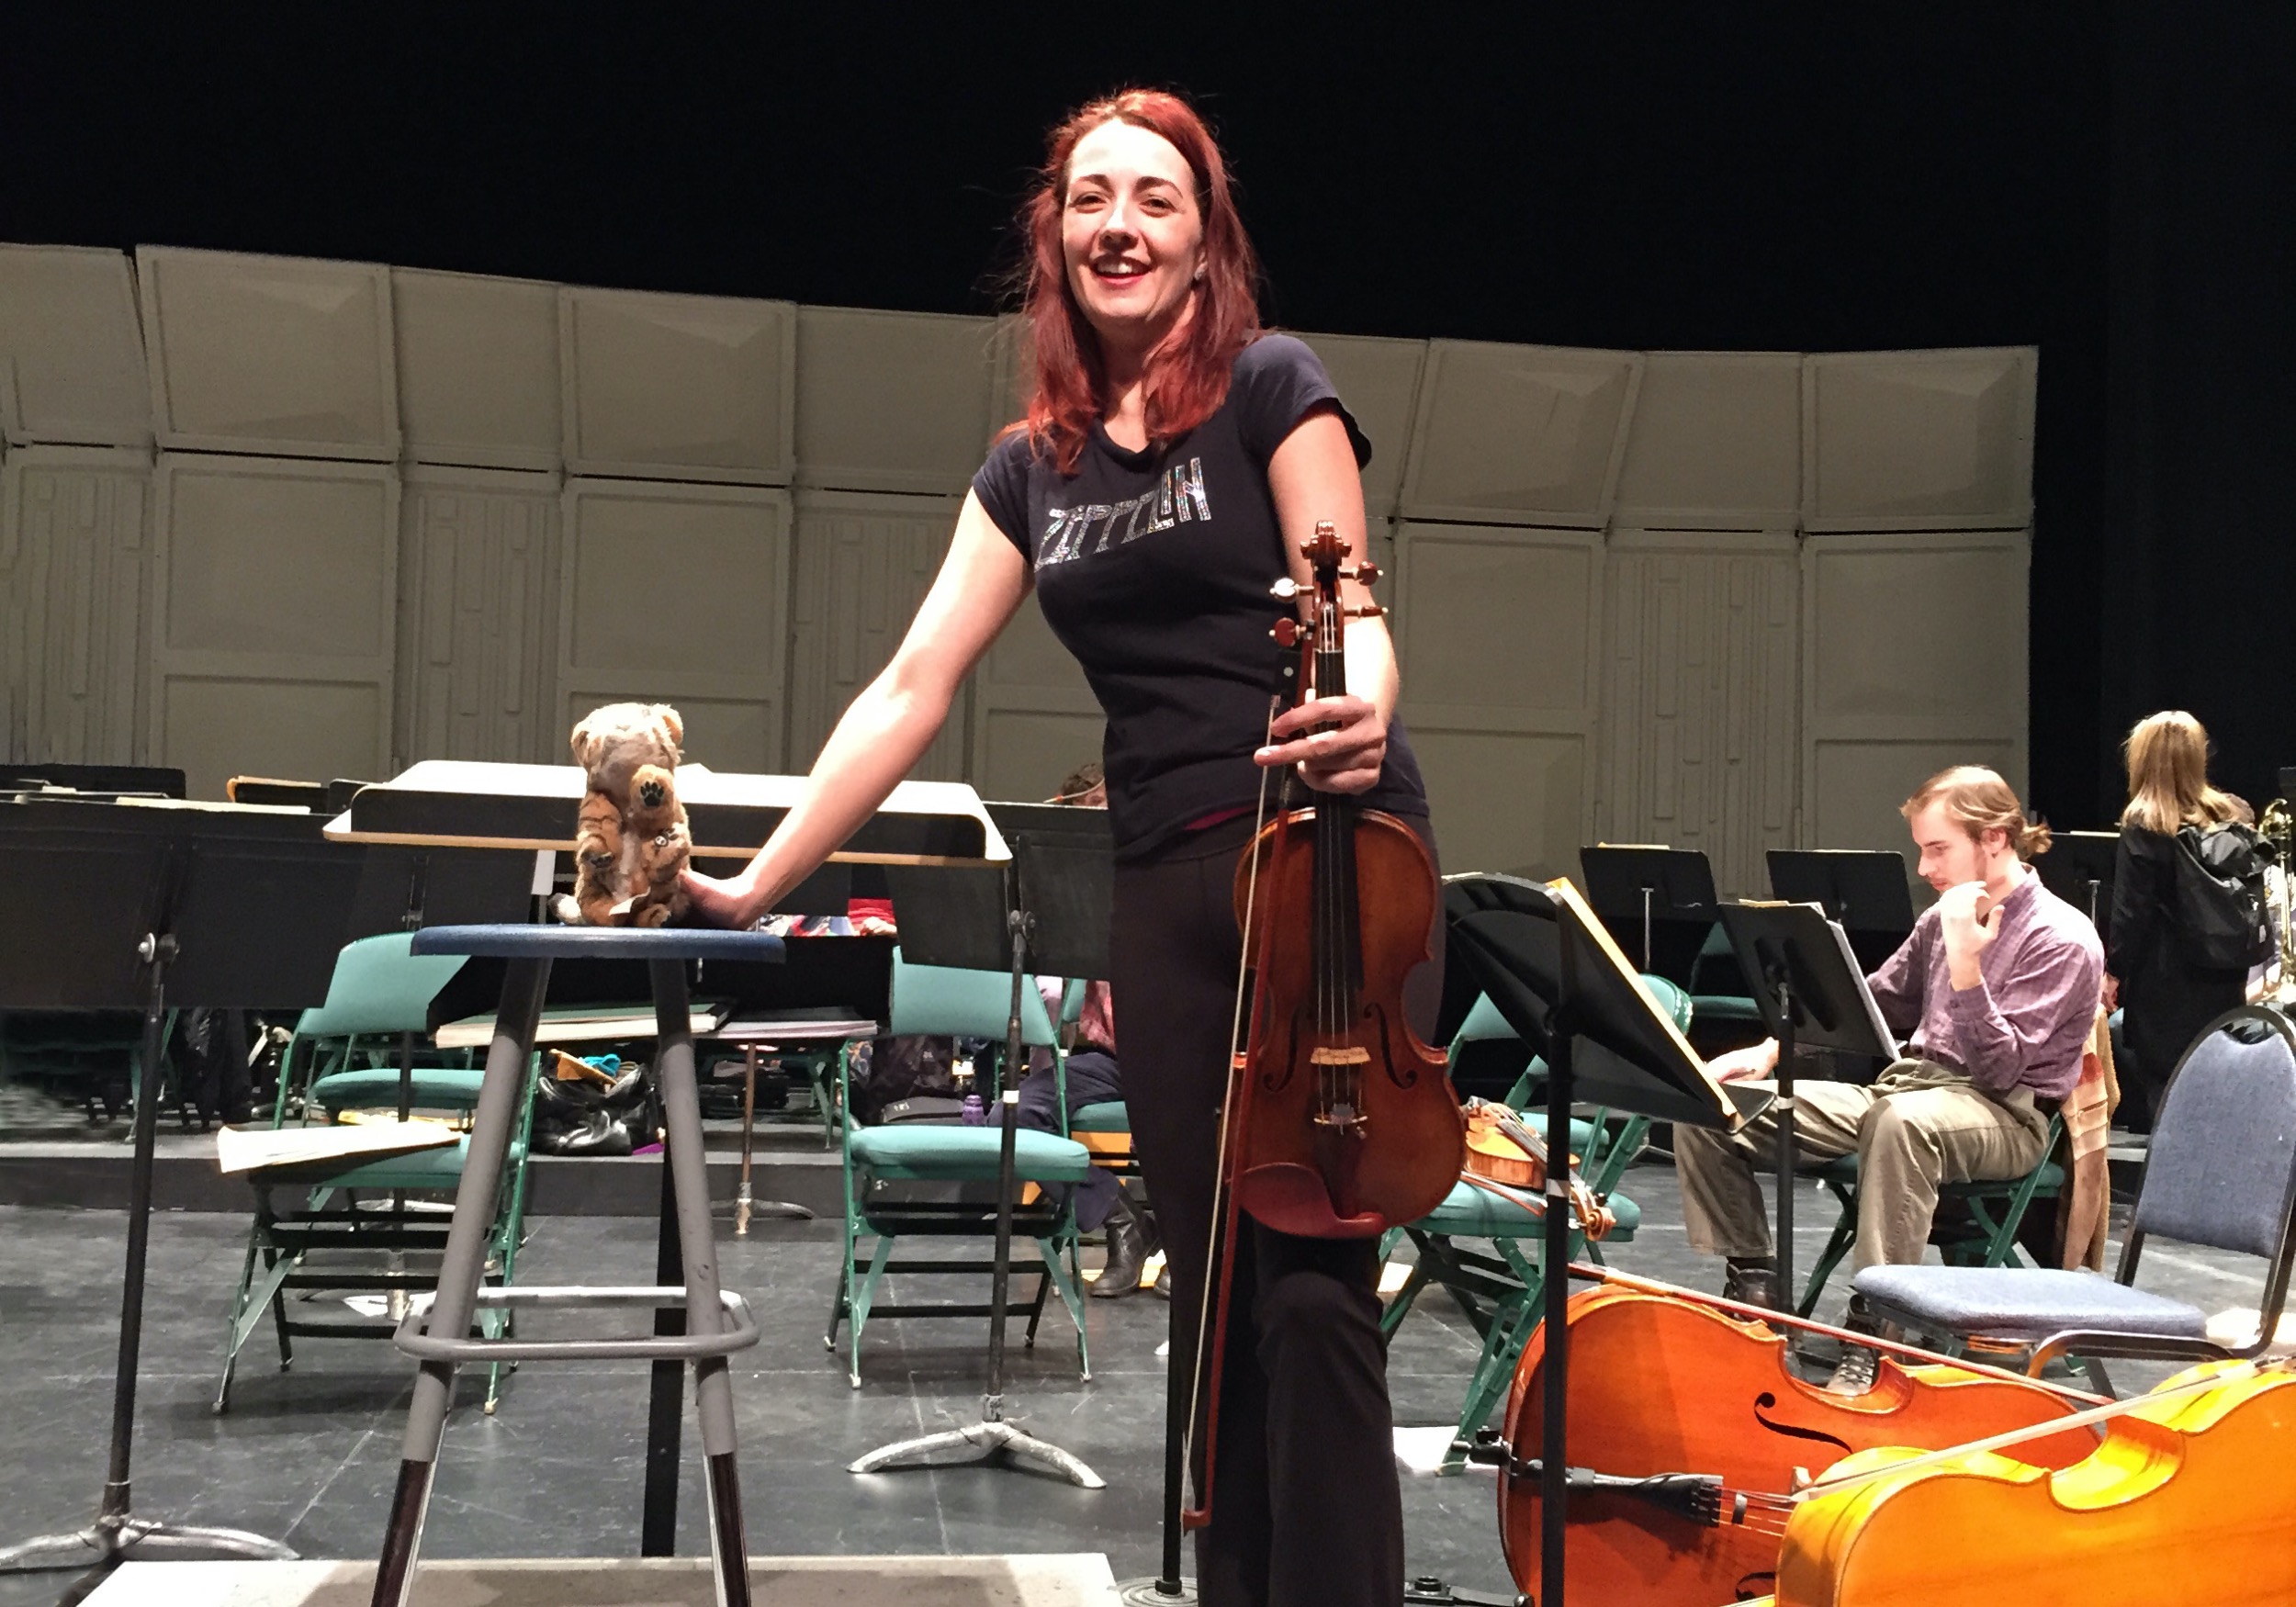 Rhiannon on stage at a symphony rehearsal in a Led Zeppelin shirt and holding a stuffed tiger on the conductor's stand